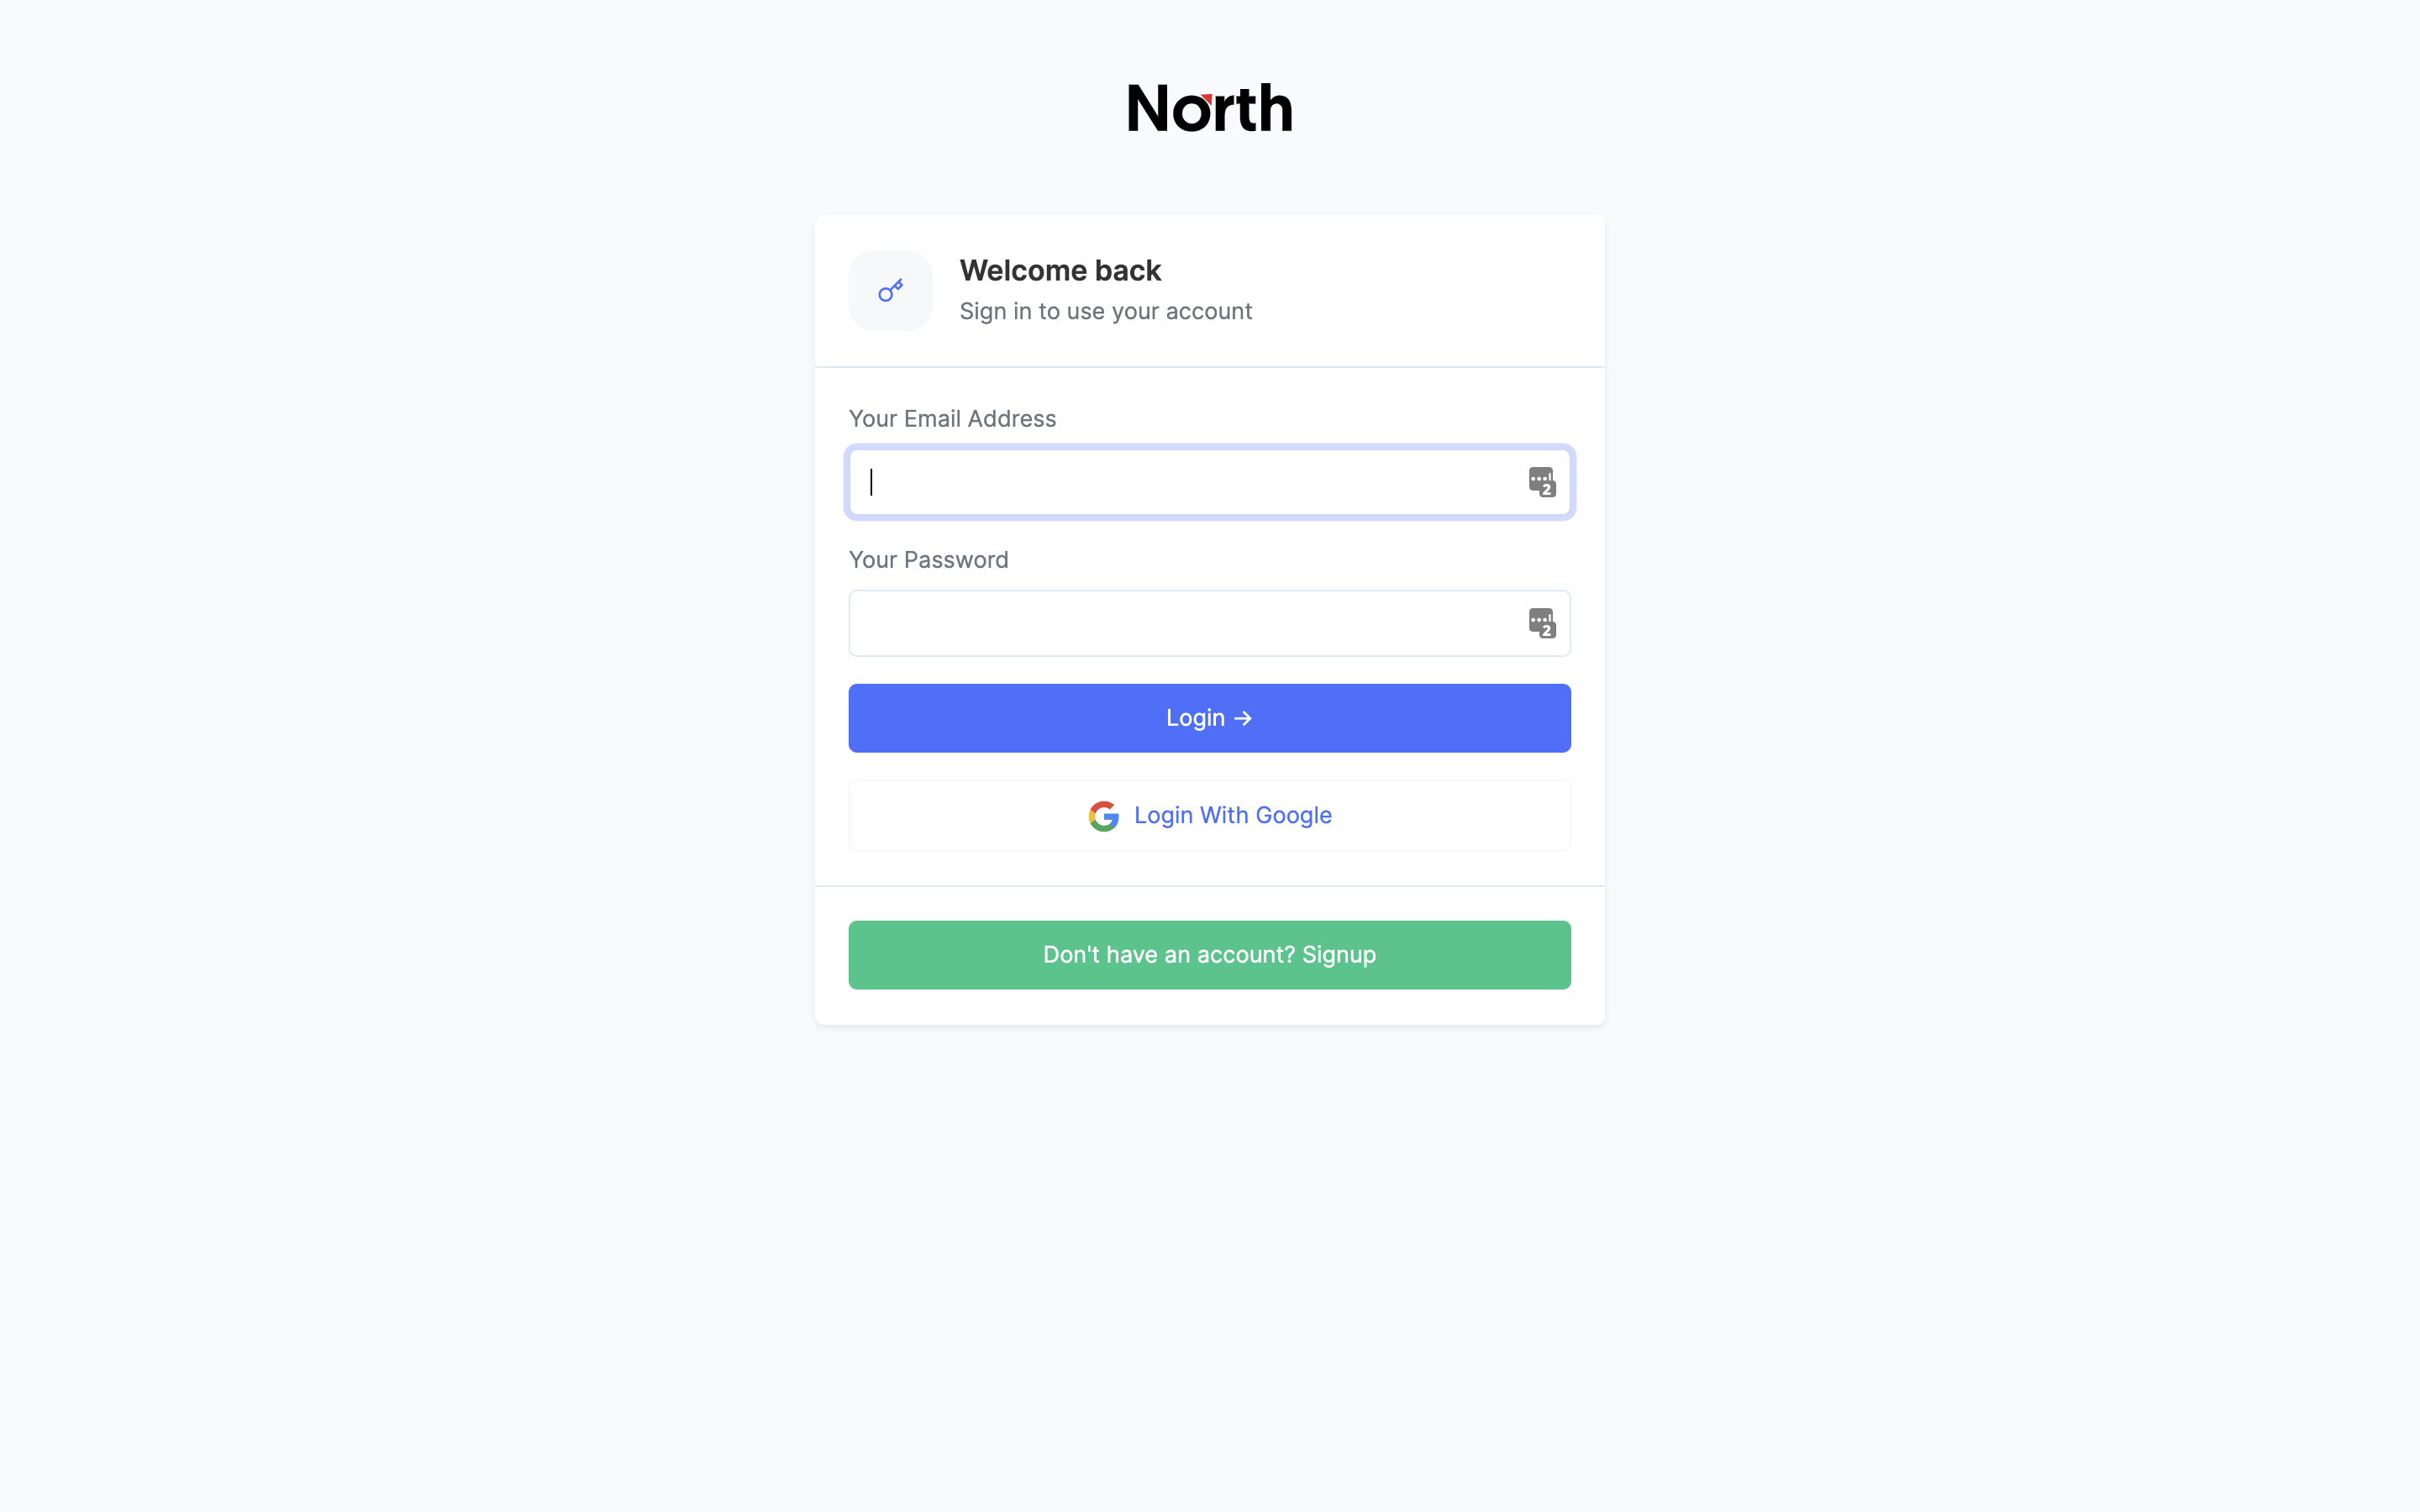 Find detailed information about North App